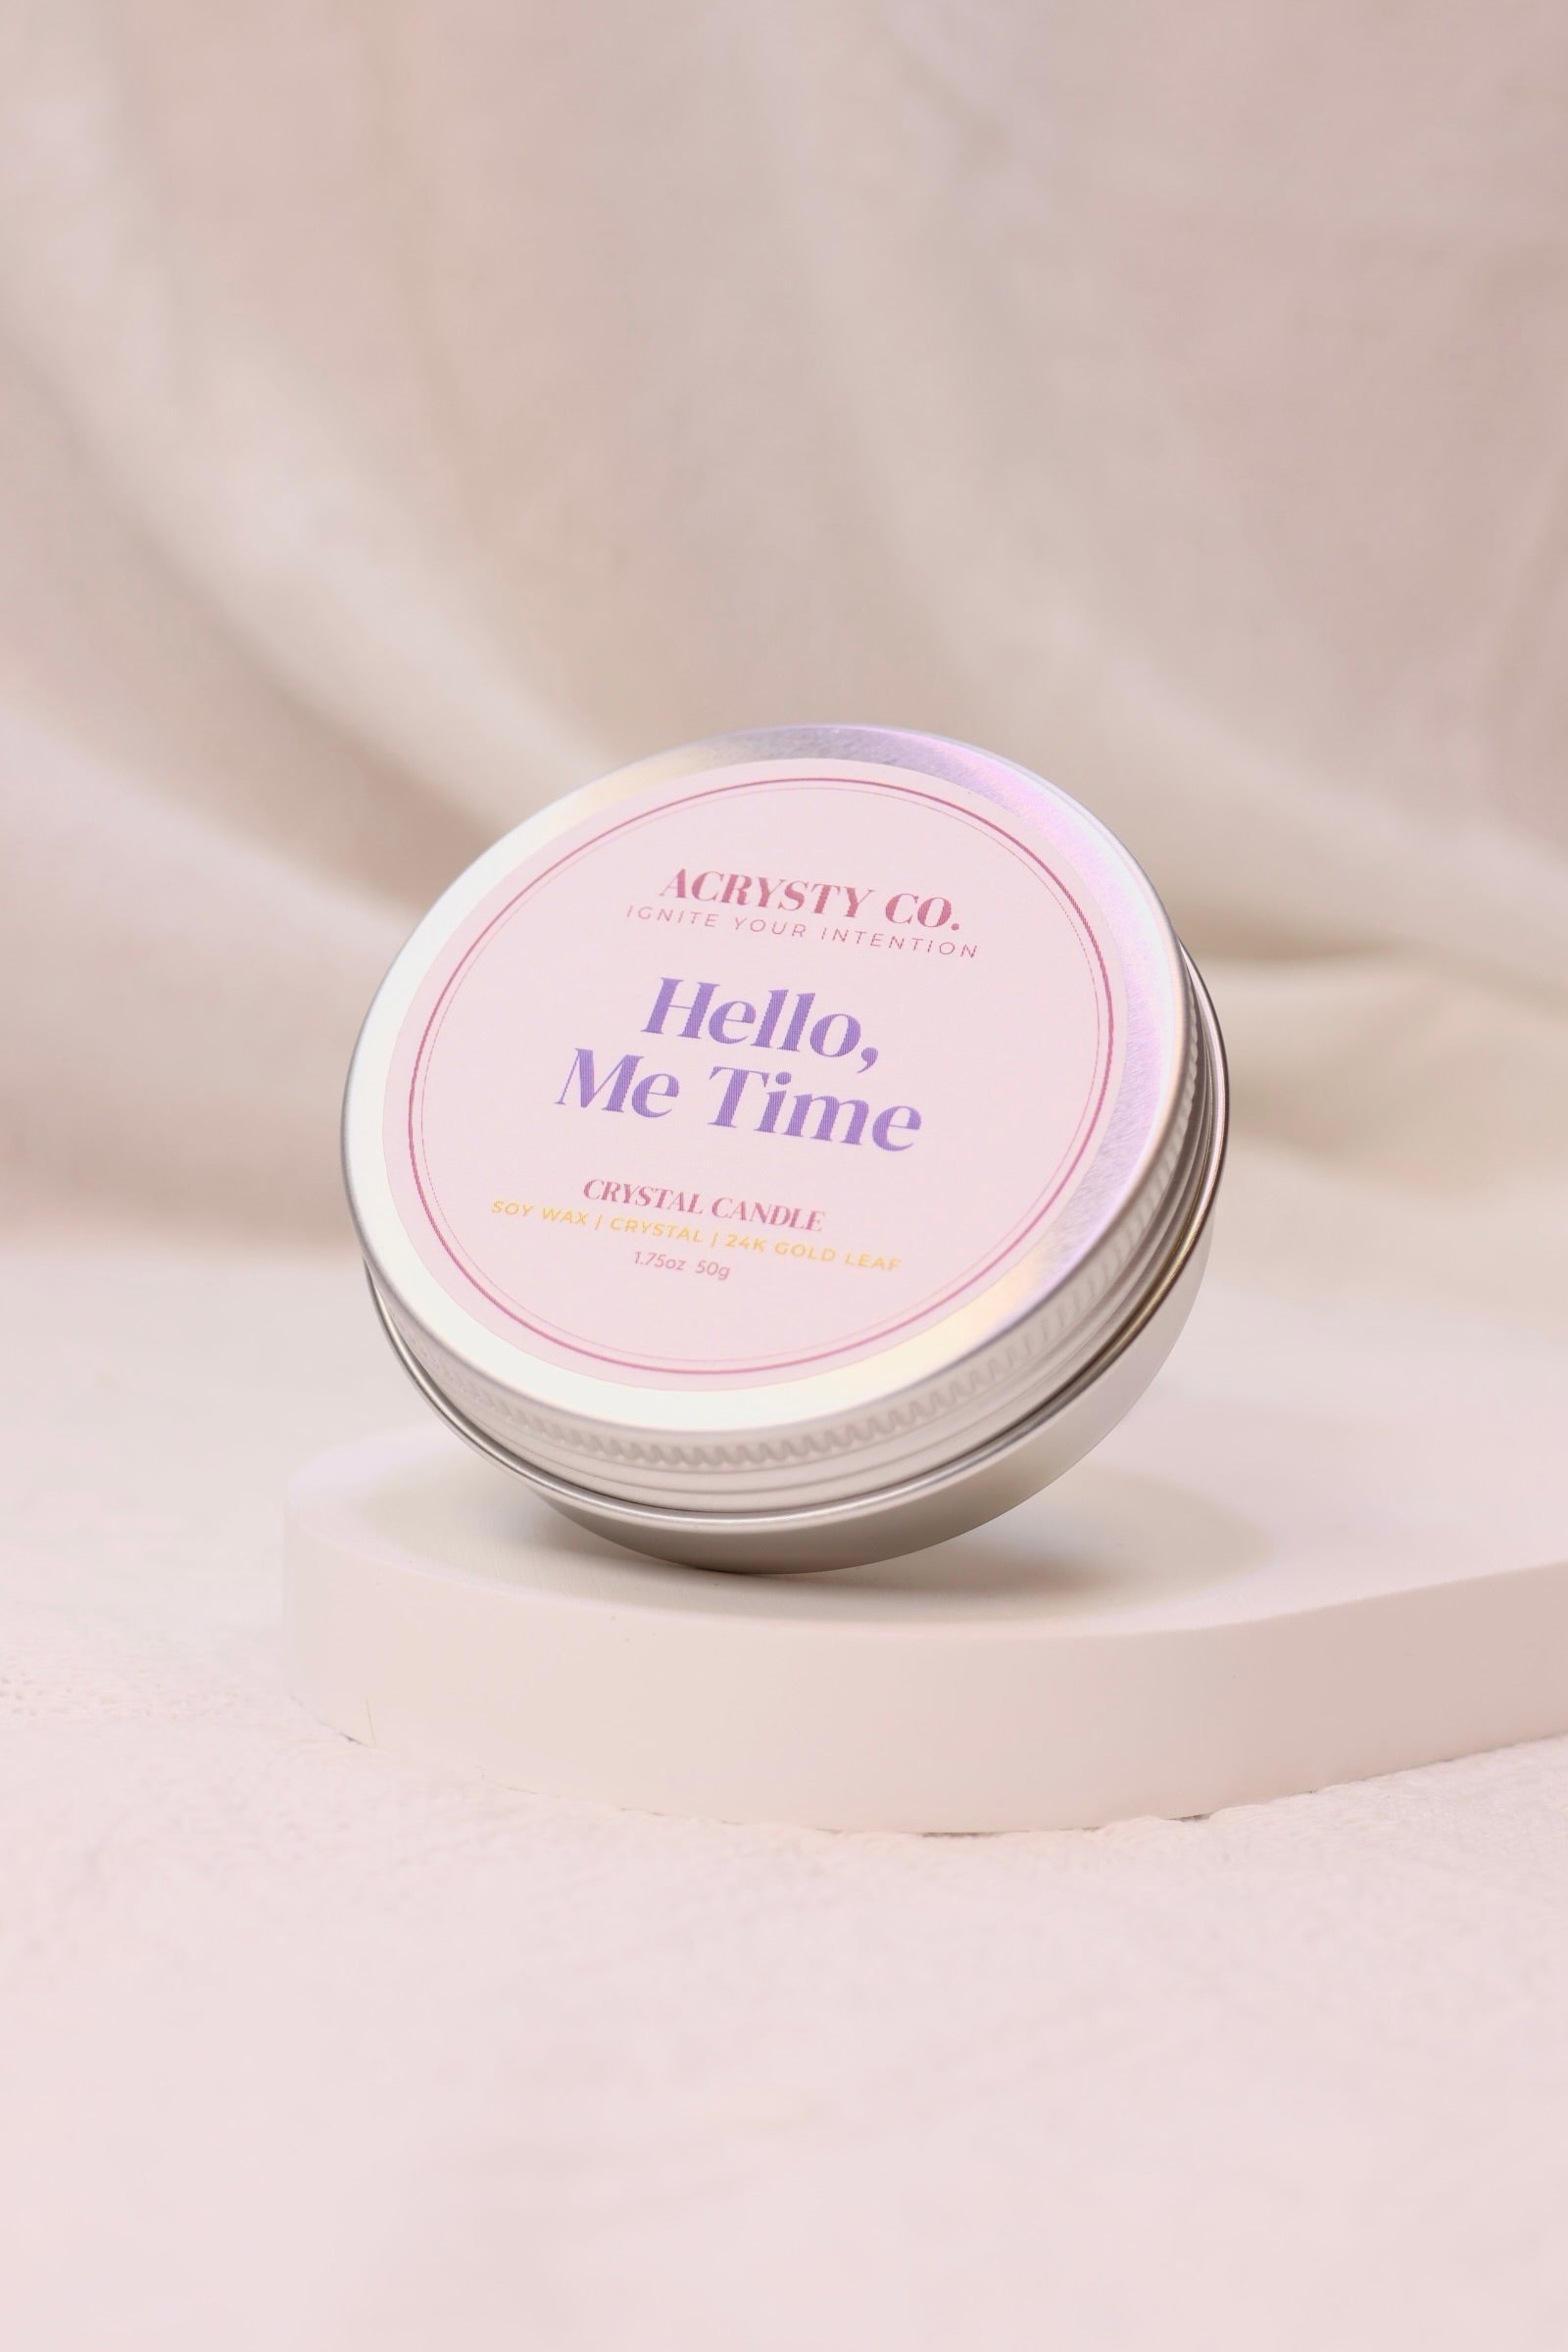 Crystal Intention Candle - Hello, Me Time! (50g)